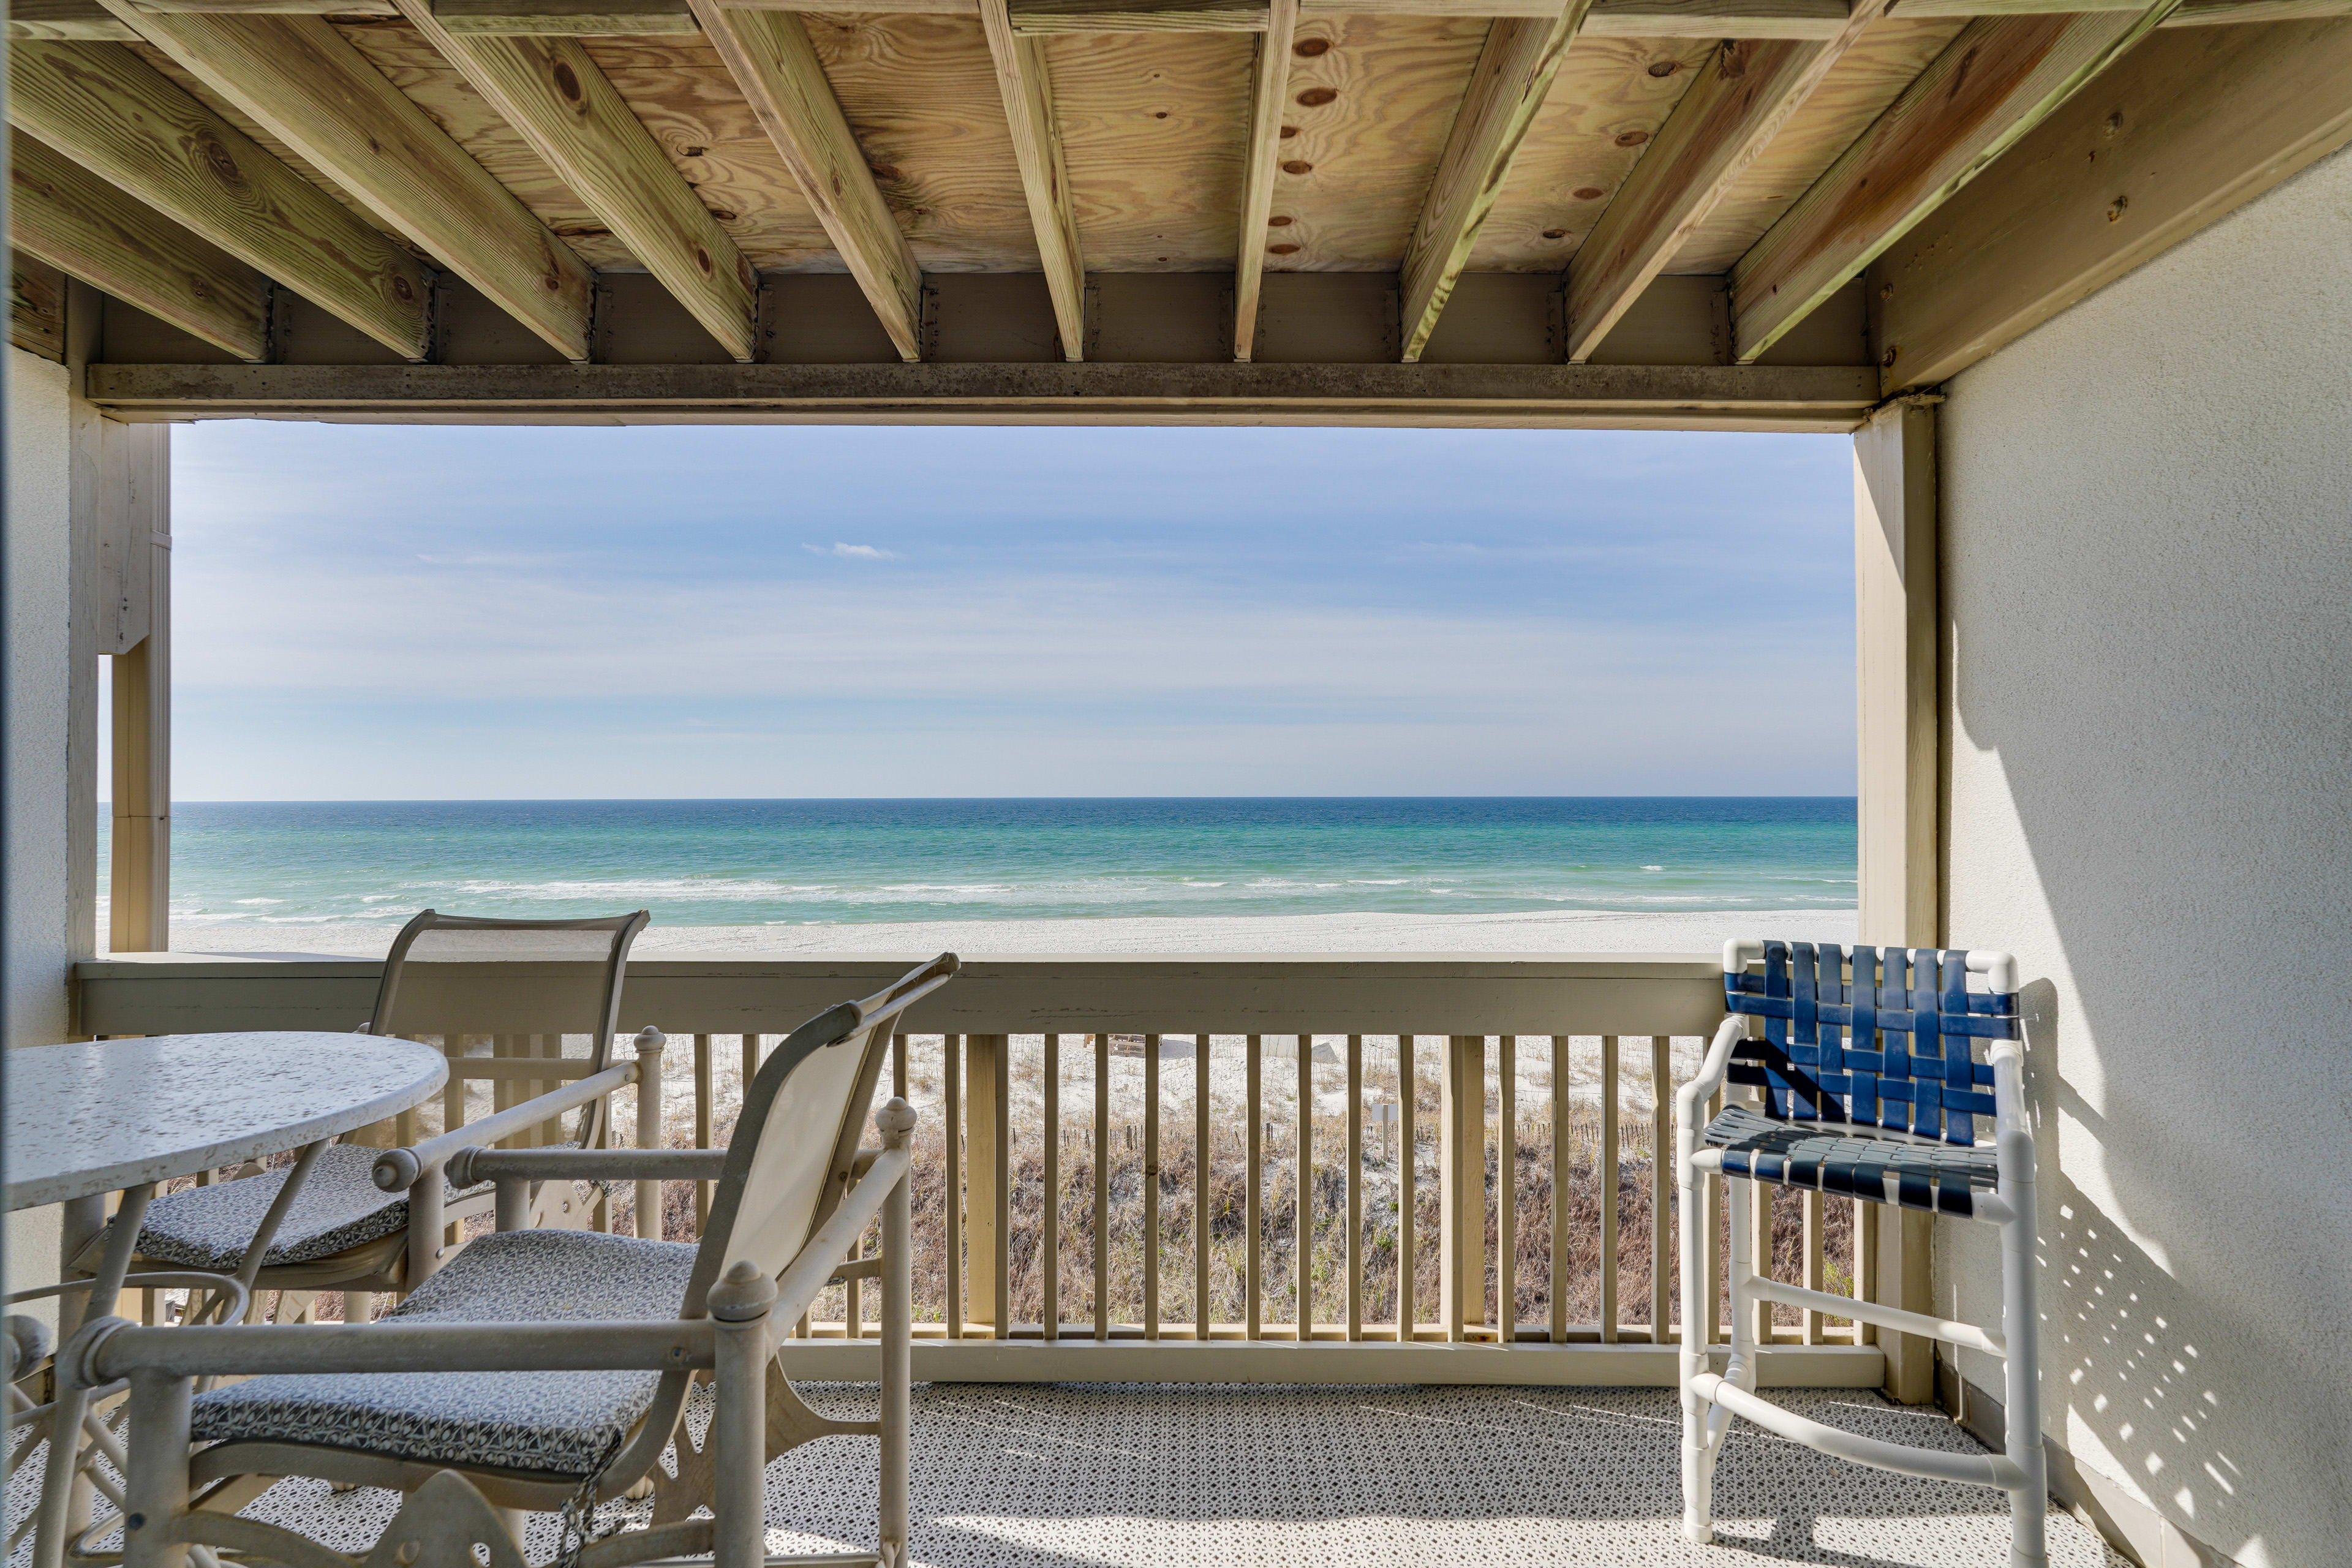 Panama City Beach Vacation Rental | 2BR | 2.5BA | 1,400 Sq Ft | Stairs Required